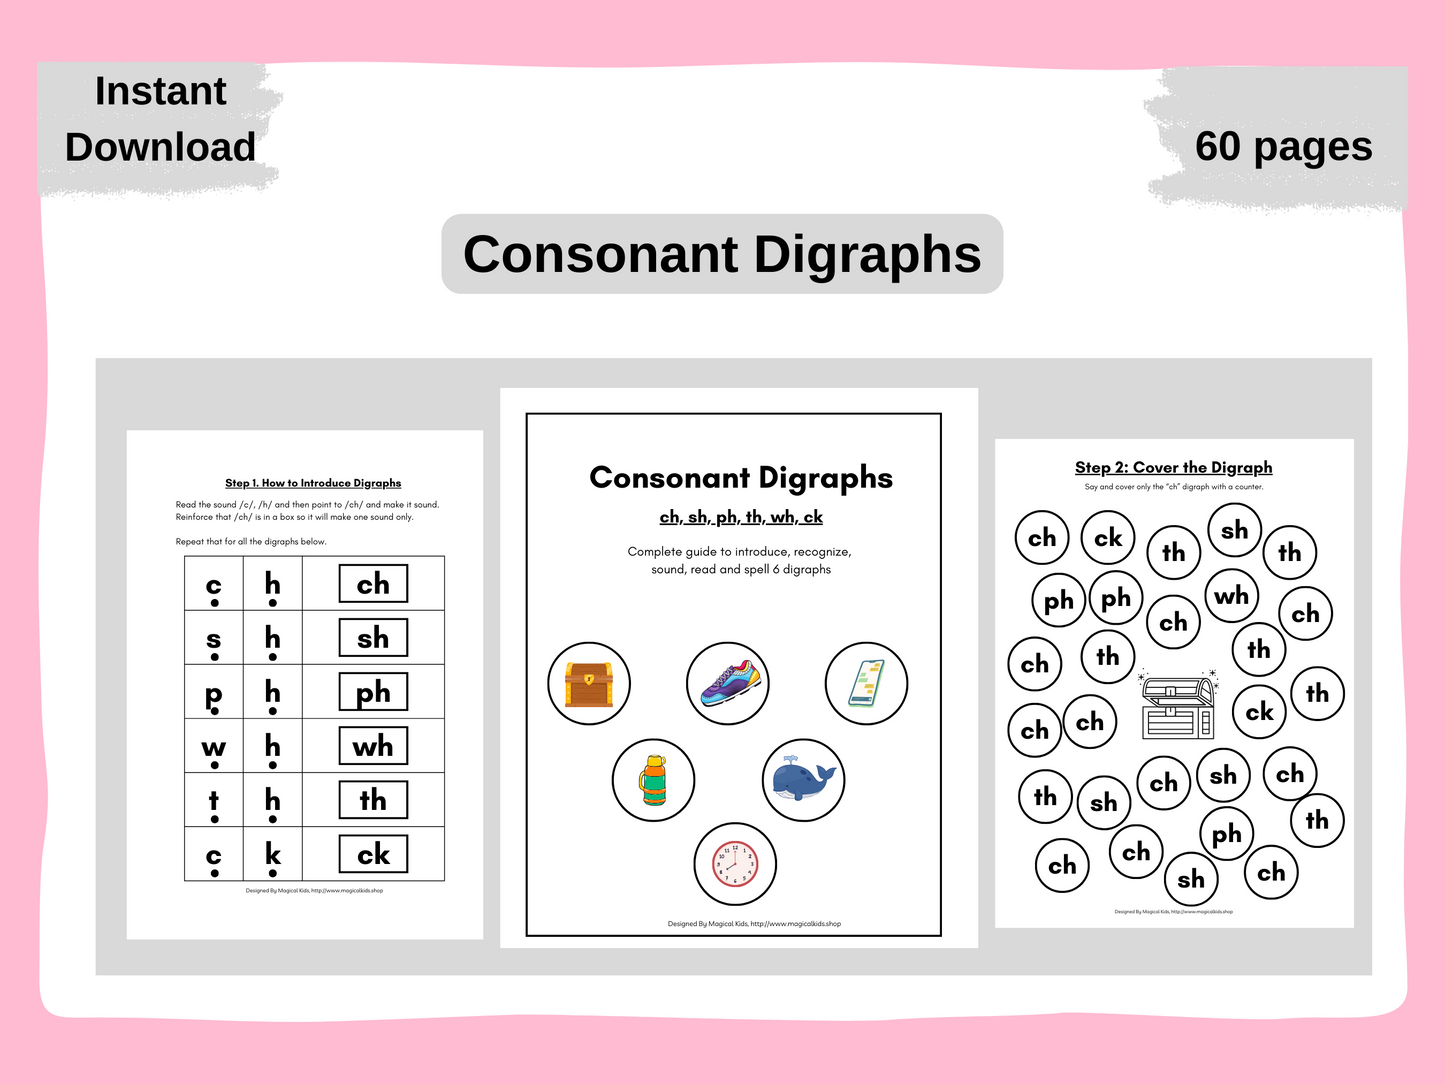 Learn to Read: Part 3 - Consonant Digraphs